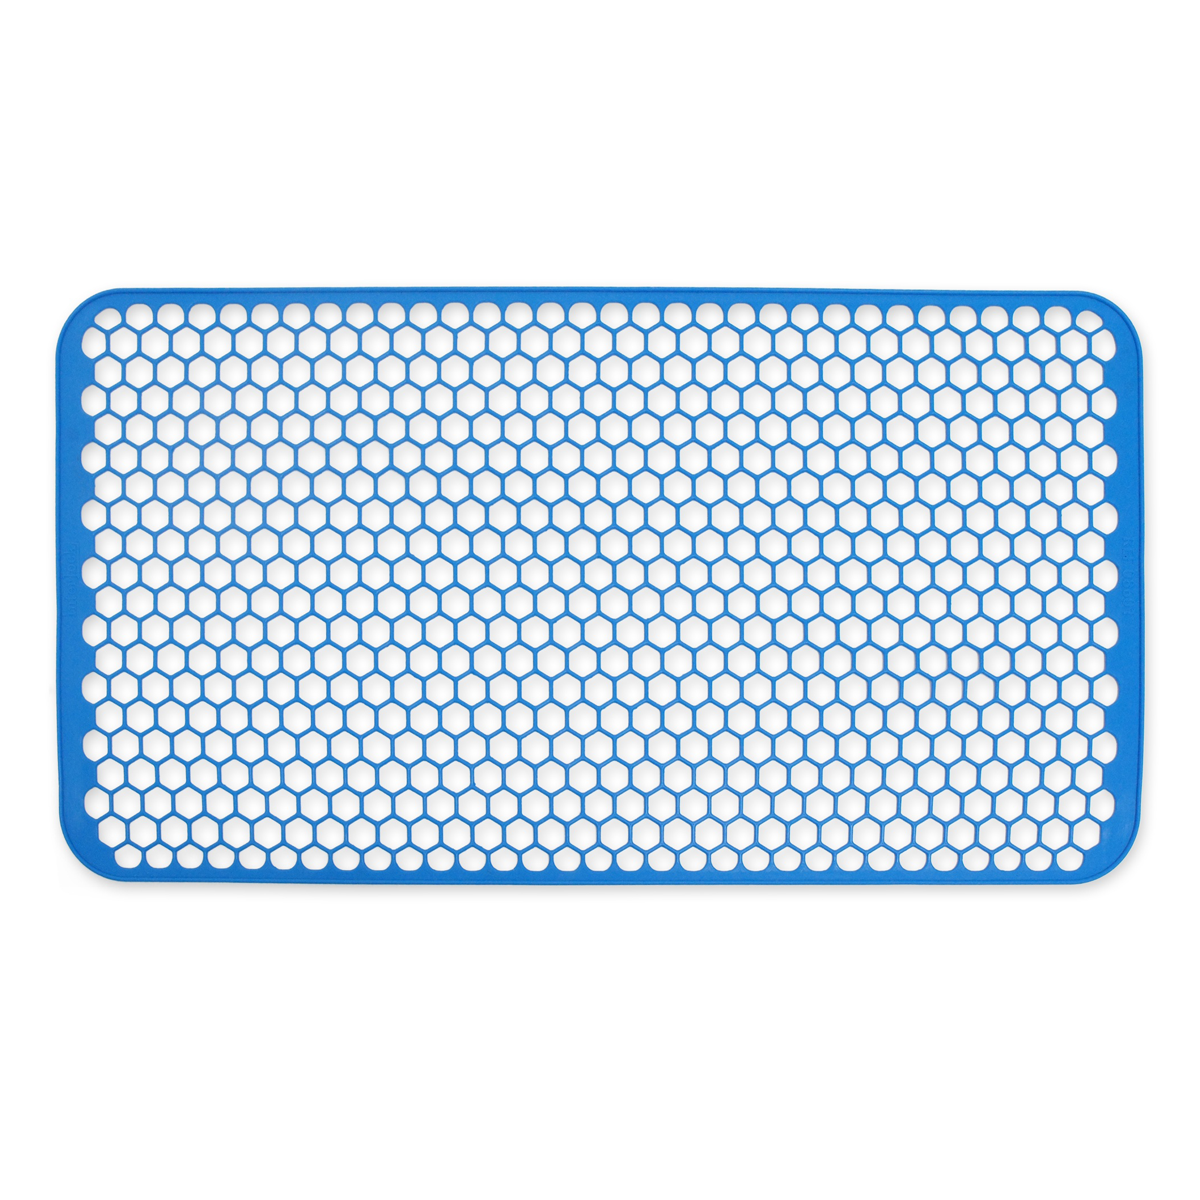 Silicone Mesh Cover Image